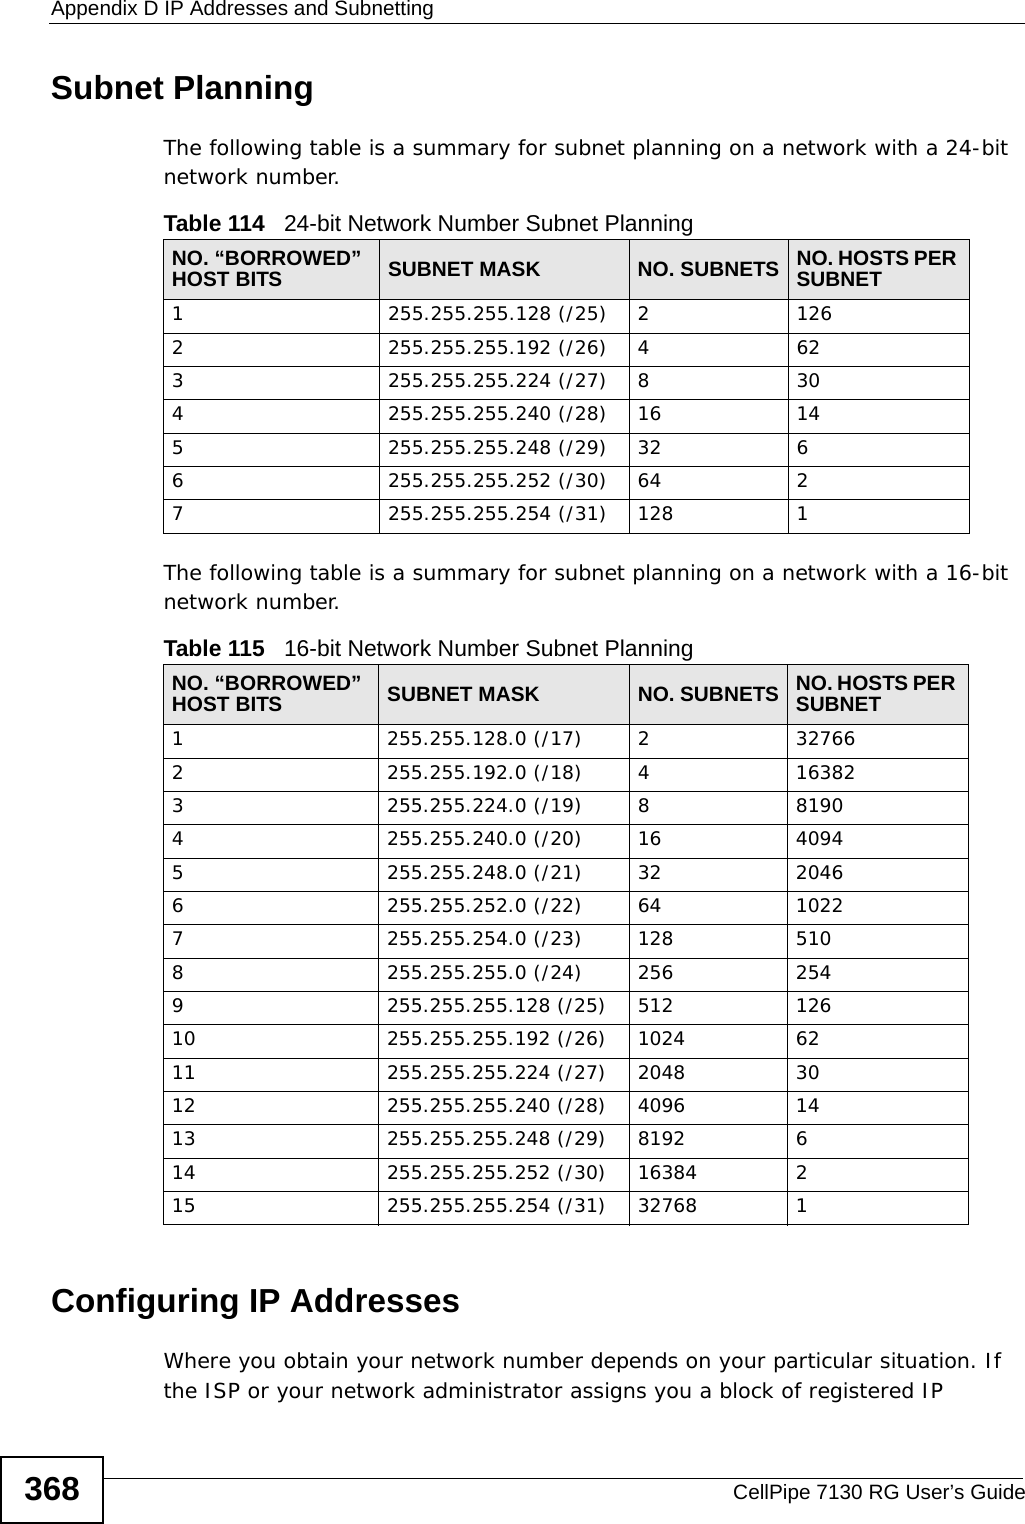 Appendix D IP Addresses and SubnettingCellPipe 7130 RG User’s Guide368Subnet PlanningThe following table is a summary for subnet planning on a network with a 24-bit network number.The following table is a summary for subnet planning on a network with a 16-bit network number. Configuring IP AddressesWhere you obtain your network number depends on your particular situation. If the ISP or your network administrator assigns you a block of registered IP Table 114   24-bit Network Number Subnet PlanningNO. “BORROWED” HOST BITS SUBNET MASK NO. SUBNETS NO. HOSTS PER SUBNET1255.255.255.128 (/25) 21262255.255.255.192 (/26) 4623255.255.255.224 (/27) 8304255.255.255.240 (/28) 16 145255.255.255.248 (/29) 32 66255.255.255.252 (/30) 64 27255.255.255.254 (/31) 128 1Table 115   16-bit Network Number Subnet PlanningNO. “BORROWED” HOST BITS SUBNET MASK NO. SUBNETS NO. HOSTS PER SUBNET1255.255.128.0 (/17) 2327662255.255.192.0 (/18) 4163823255.255.224.0 (/19) 881904255.255.240.0 (/20) 16 40945255.255.248.0 (/21) 32 20466255.255.252.0 (/22) 64 10227255.255.254.0 (/23) 128 5108255.255.255.0 (/24) 256 2549255.255.255.128 (/25) 512 12610 255.255.255.192 (/26) 1024 6211 255.255.255.224 (/27) 2048 3012 255.255.255.240 (/28) 4096 1413 255.255.255.248 (/29) 8192 614 255.255.255.252 (/30) 16384 215 255.255.255.254 (/31) 32768 1